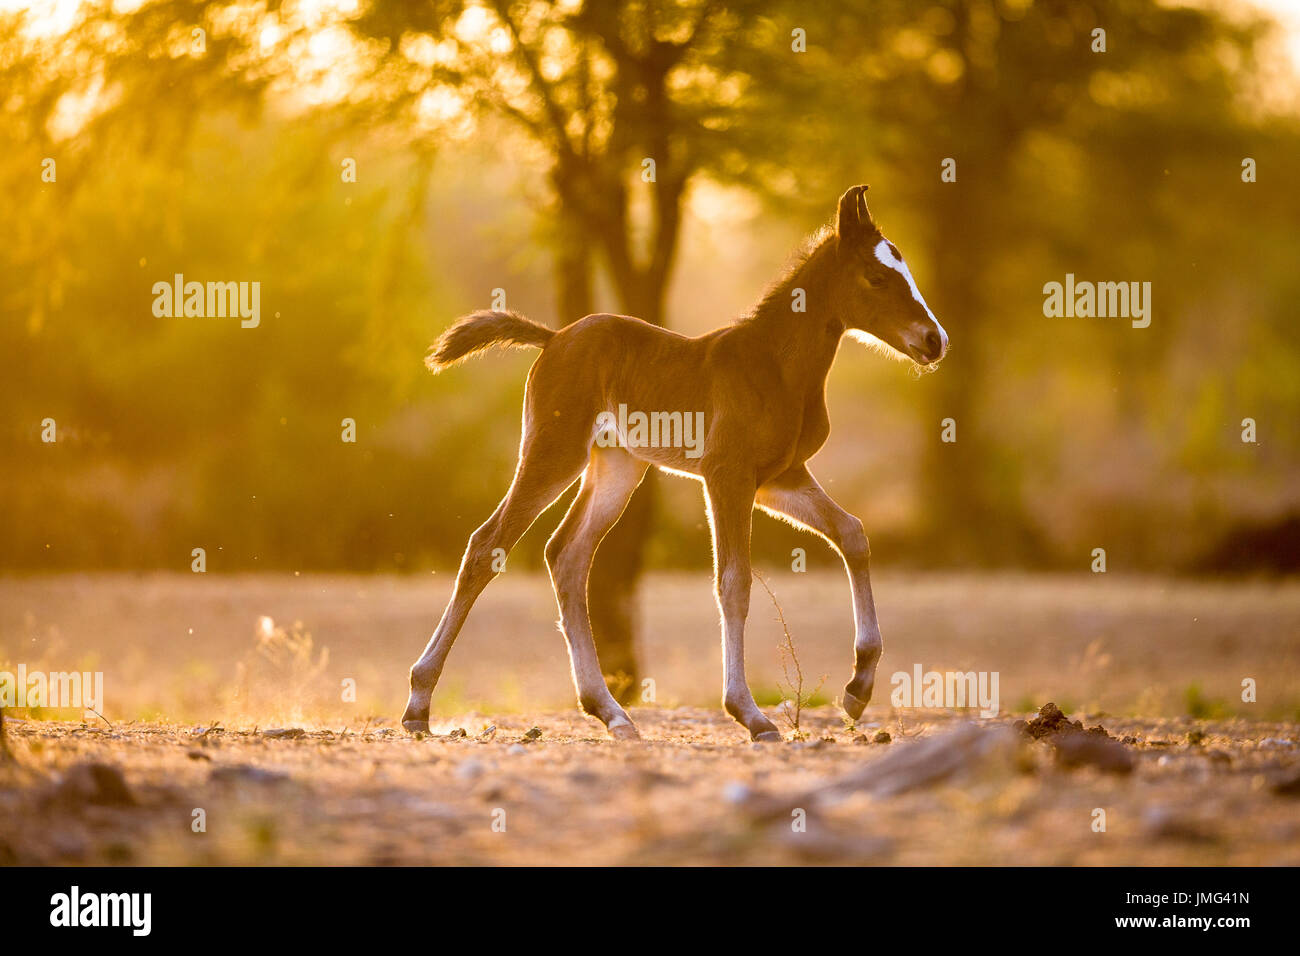 Marwari Horse. Bay filly-foal trotting in evening light. India Stock Photo